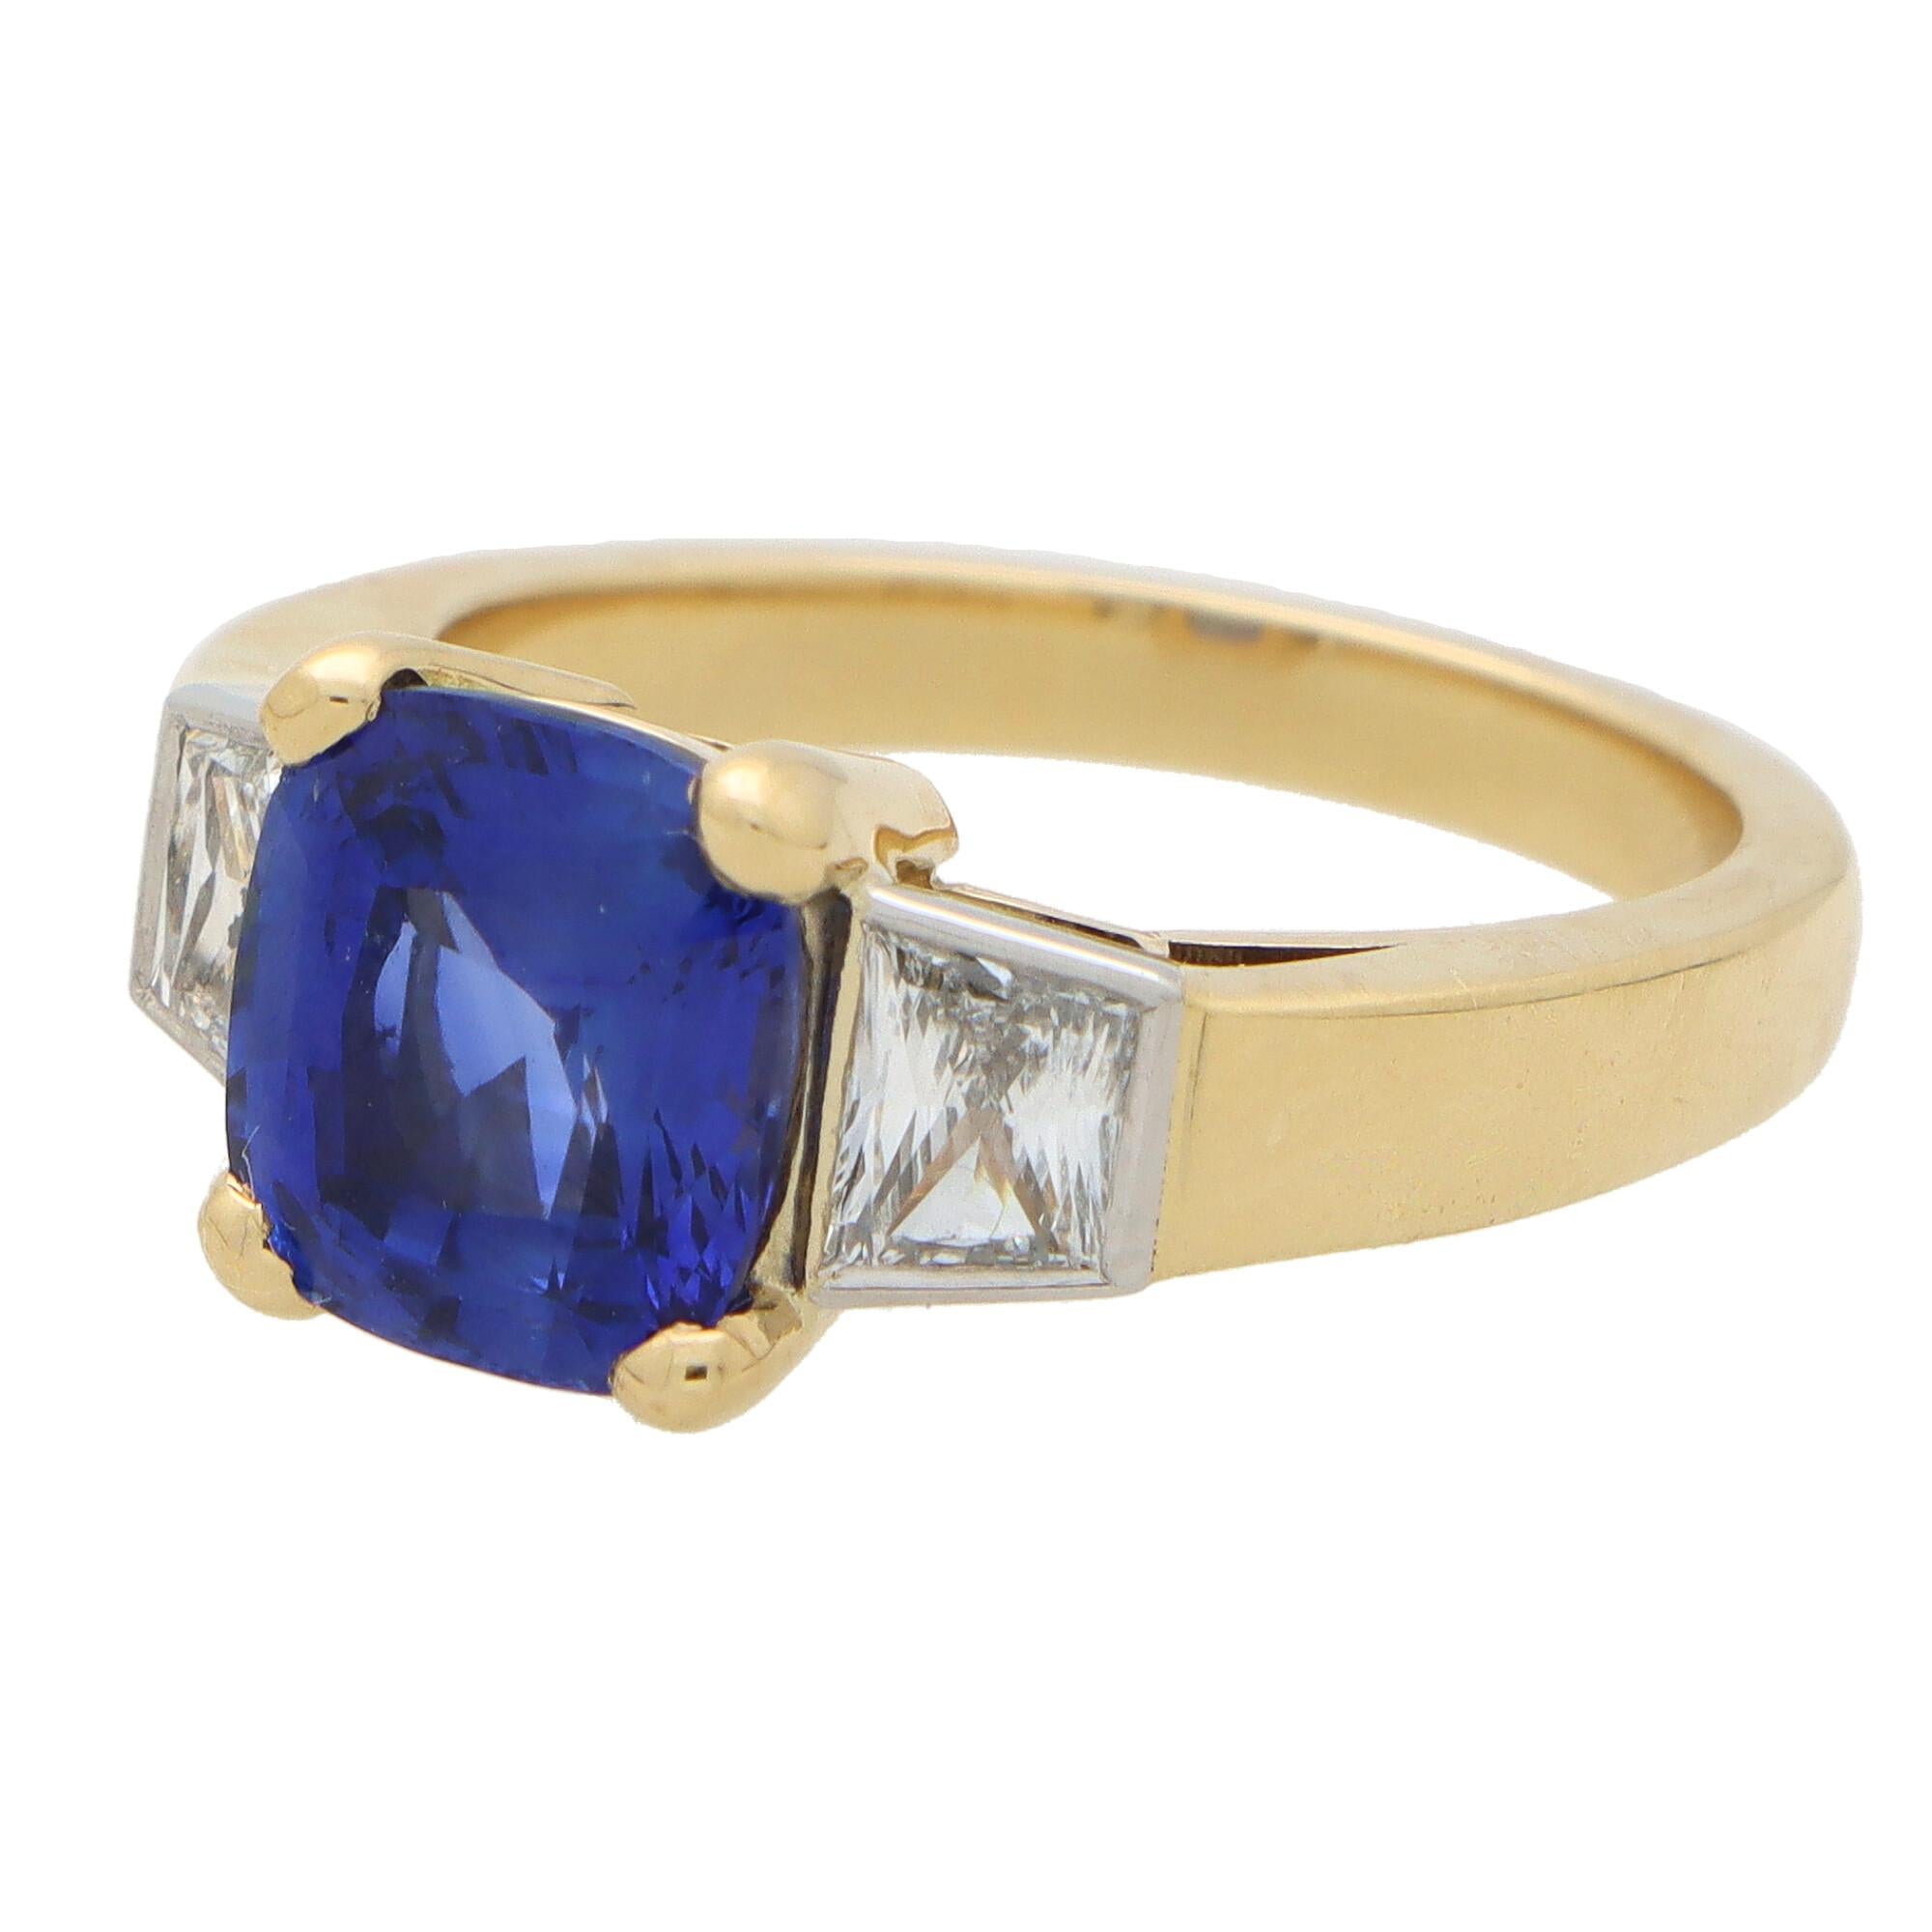 18k white gold ring with blue sapphire